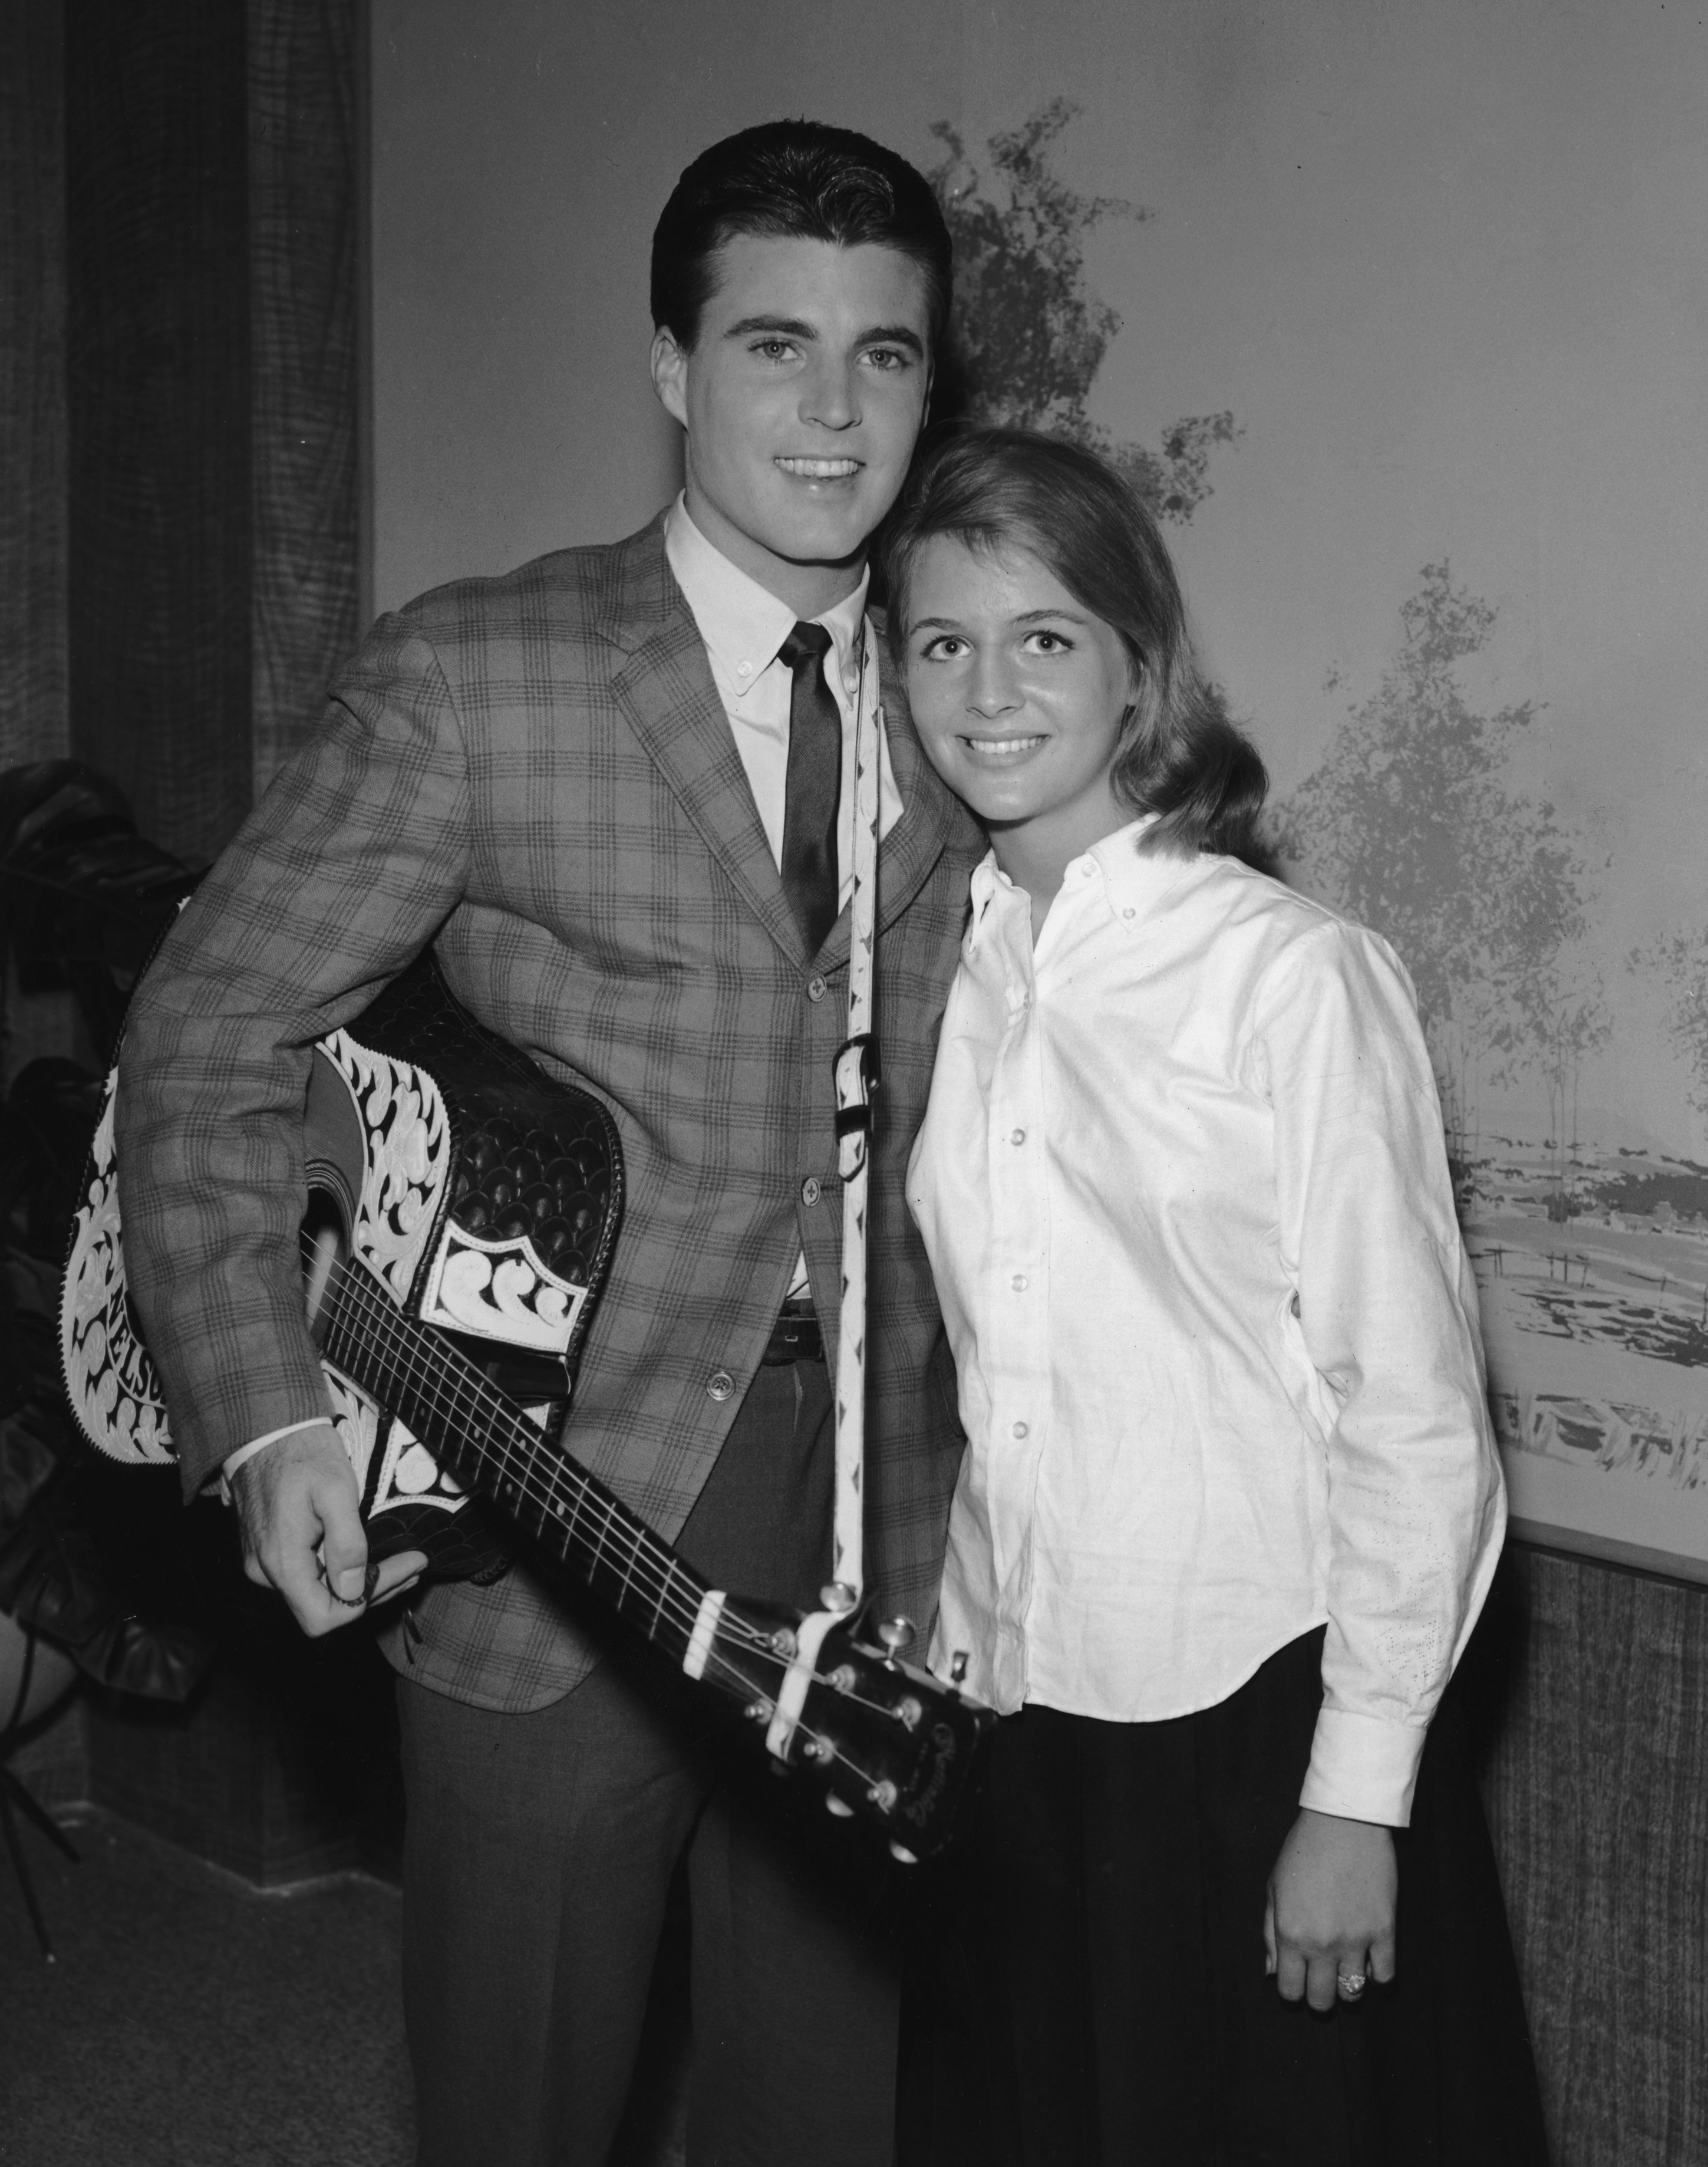 Rick Nelson smiles with his wife Kristin Harmon. He holds an acoustic guitar. Circa 1963 | Source: Getty Images